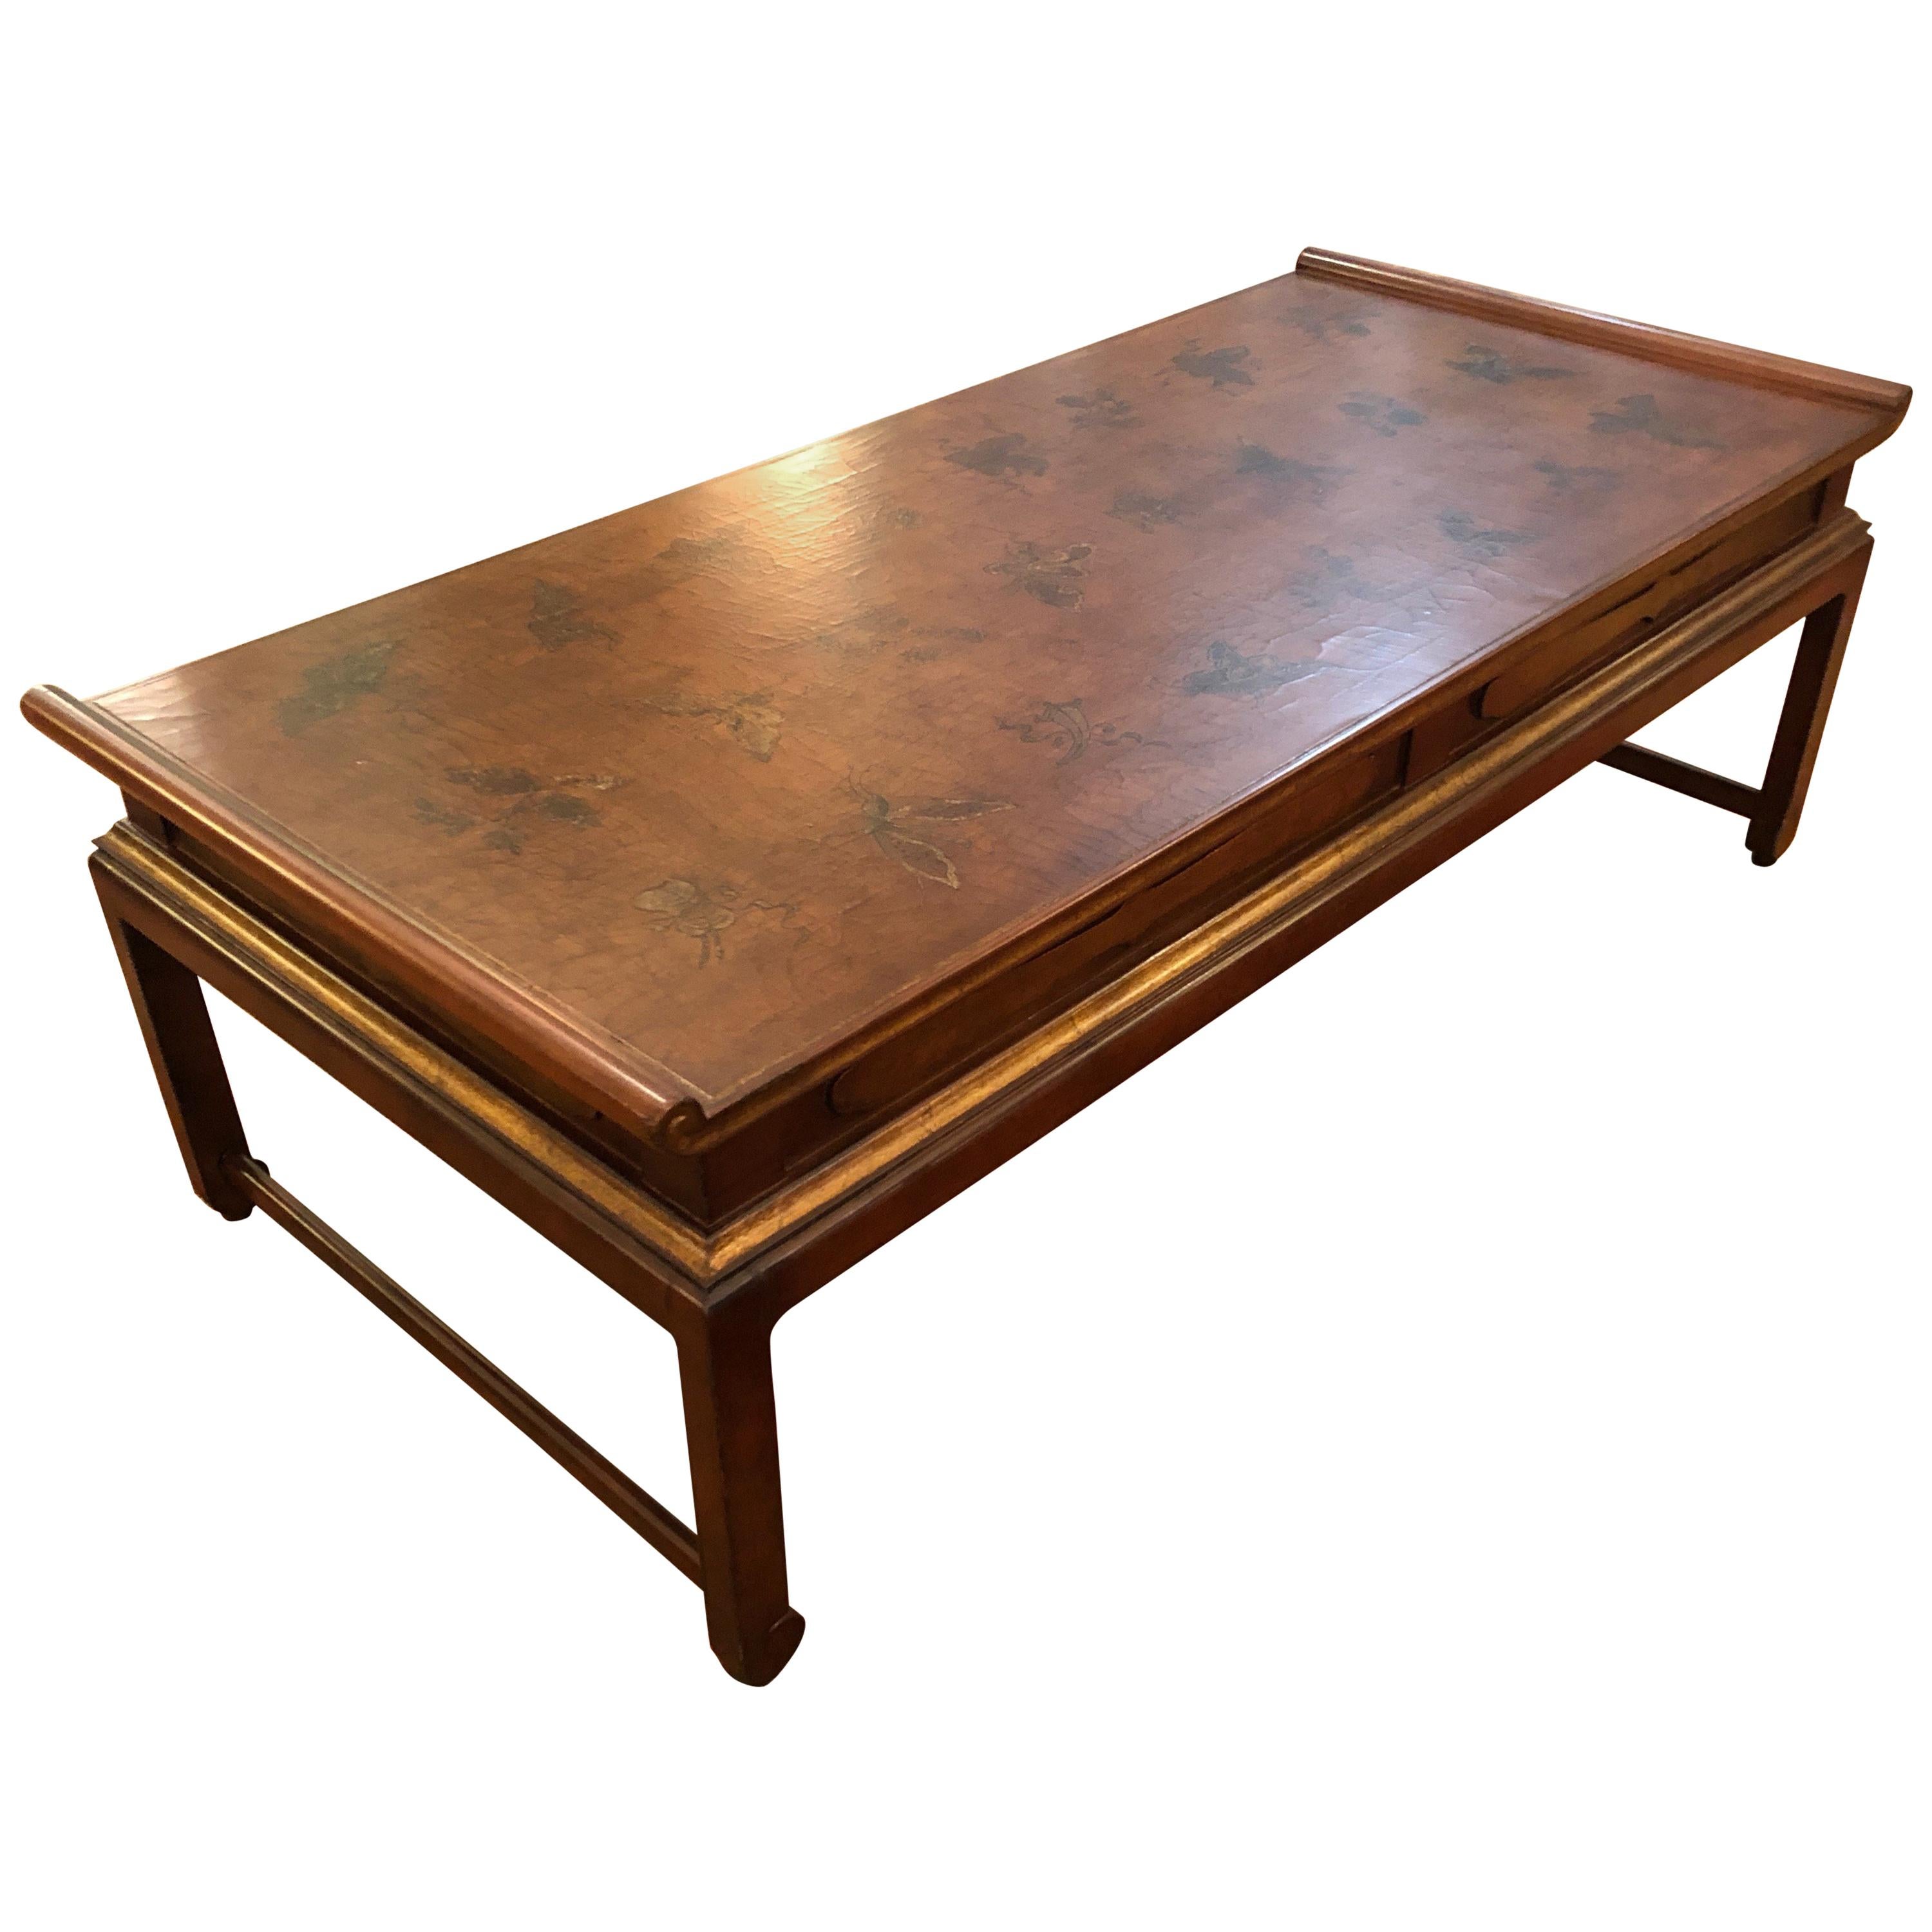 Elegant Asian Style Wood and Gilded Coffee Table